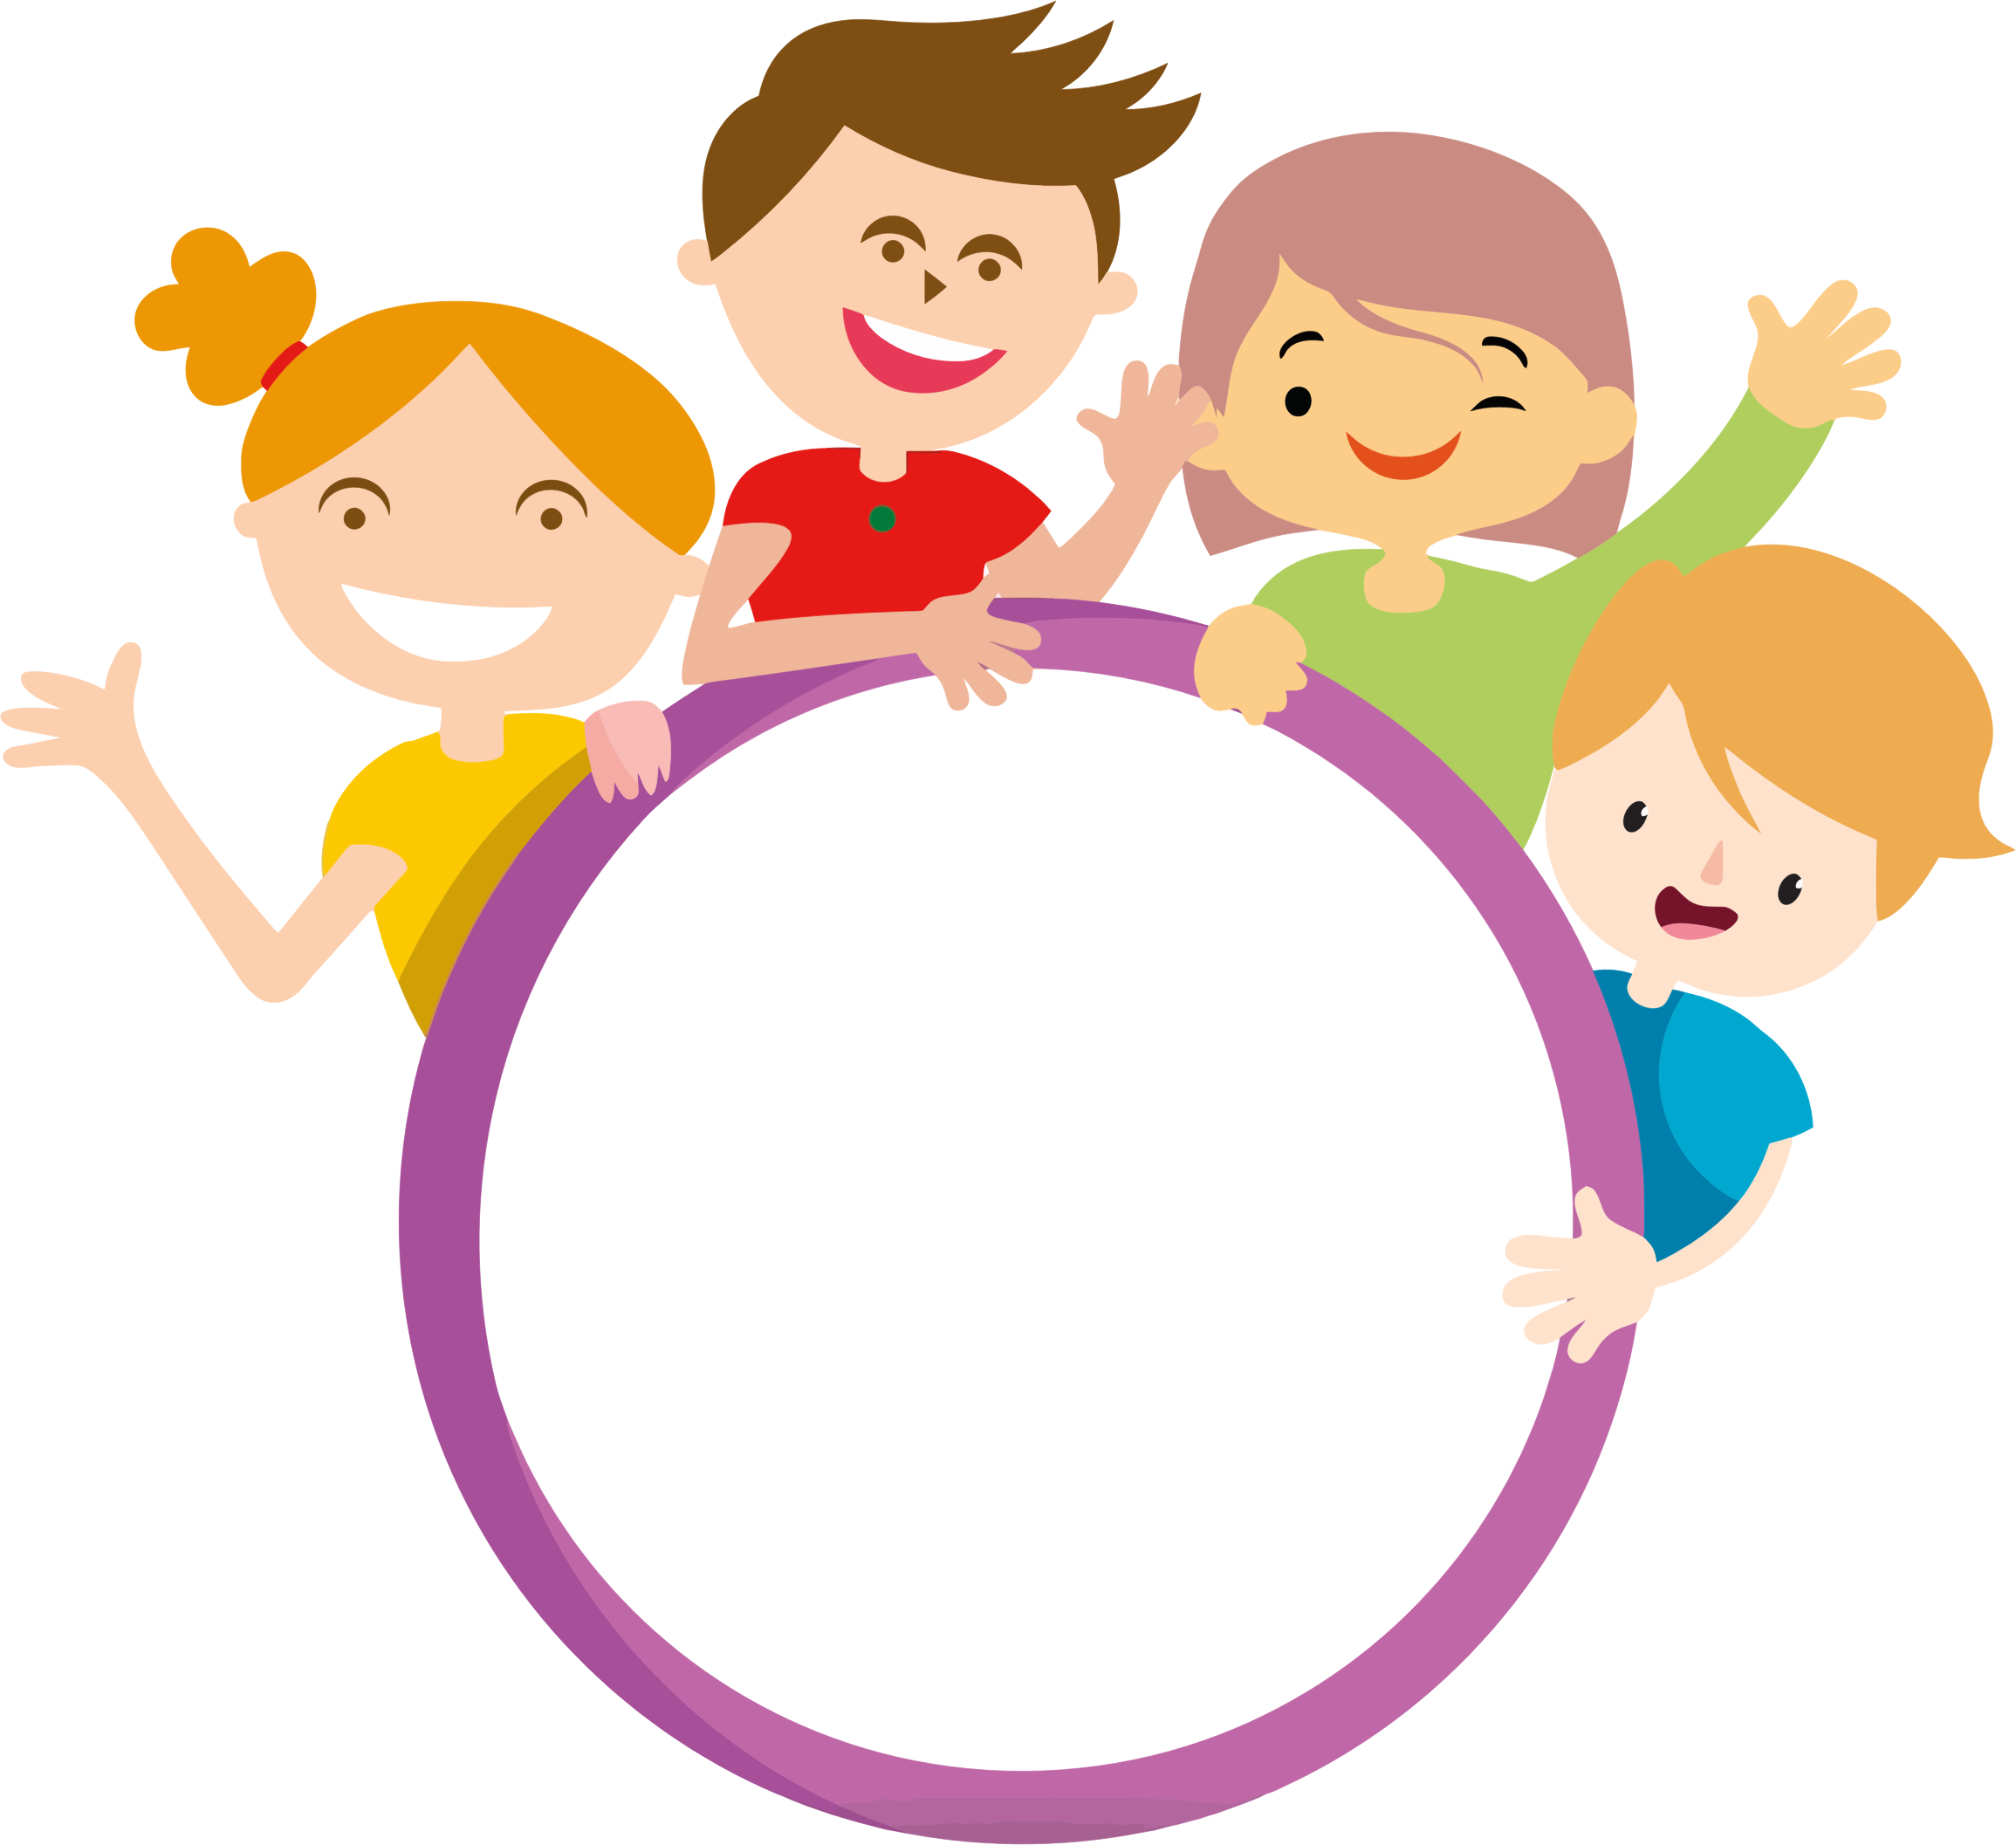 Kids and circle big. Human clipart four person